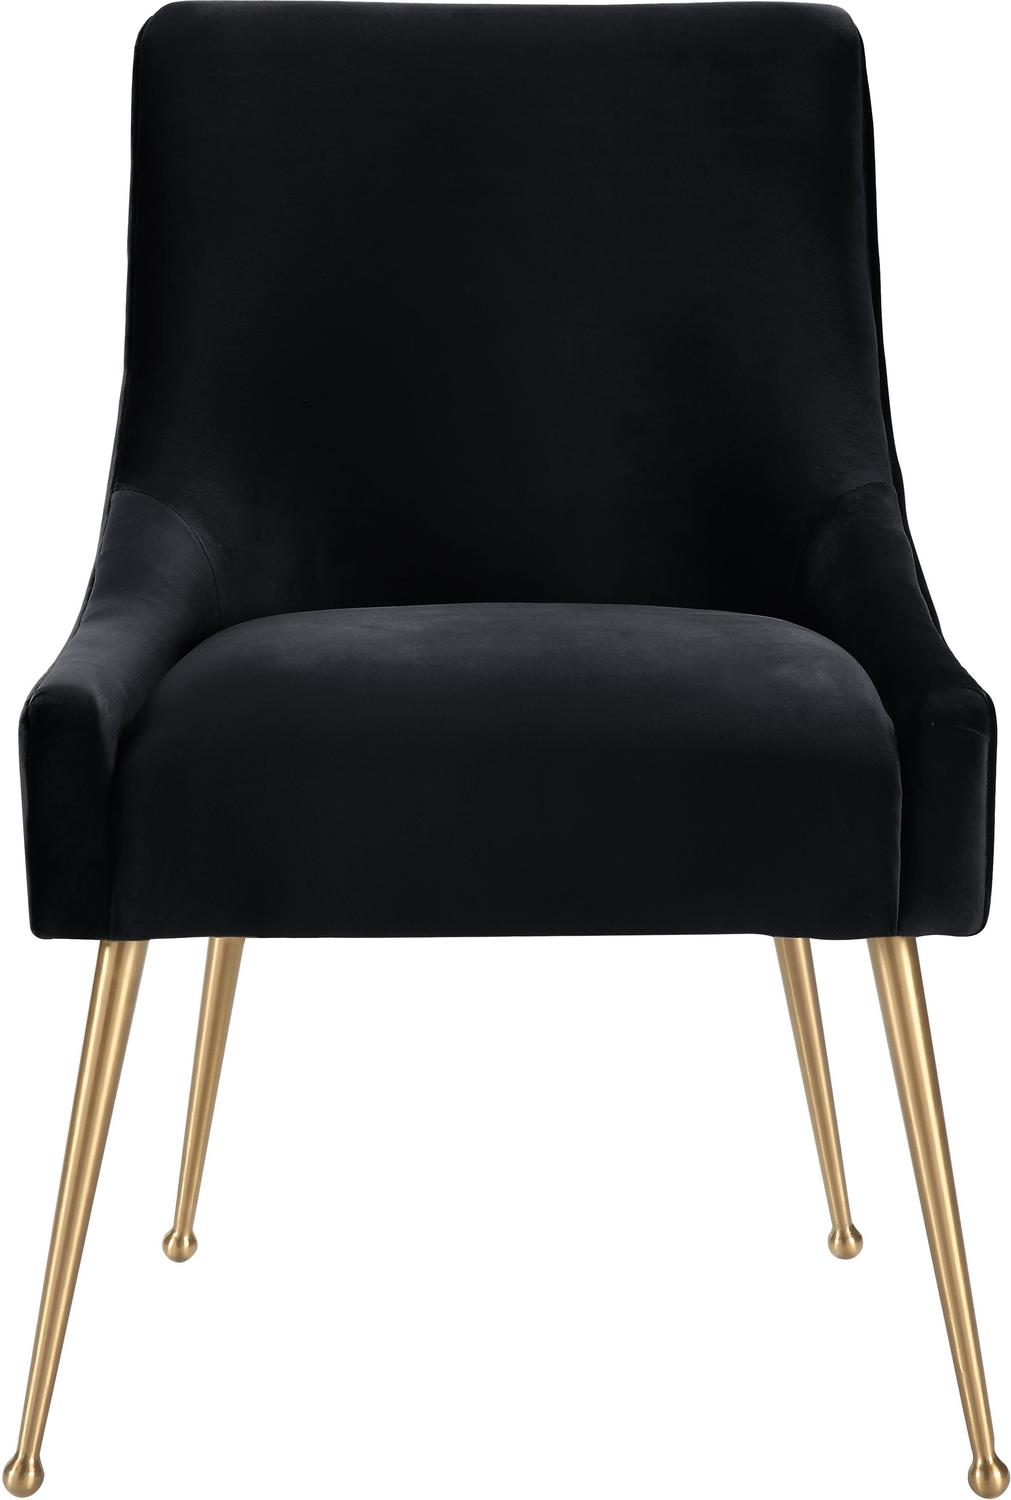 contemporary leather chair Contemporary Design Furniture Dining Chairs Chairs Black